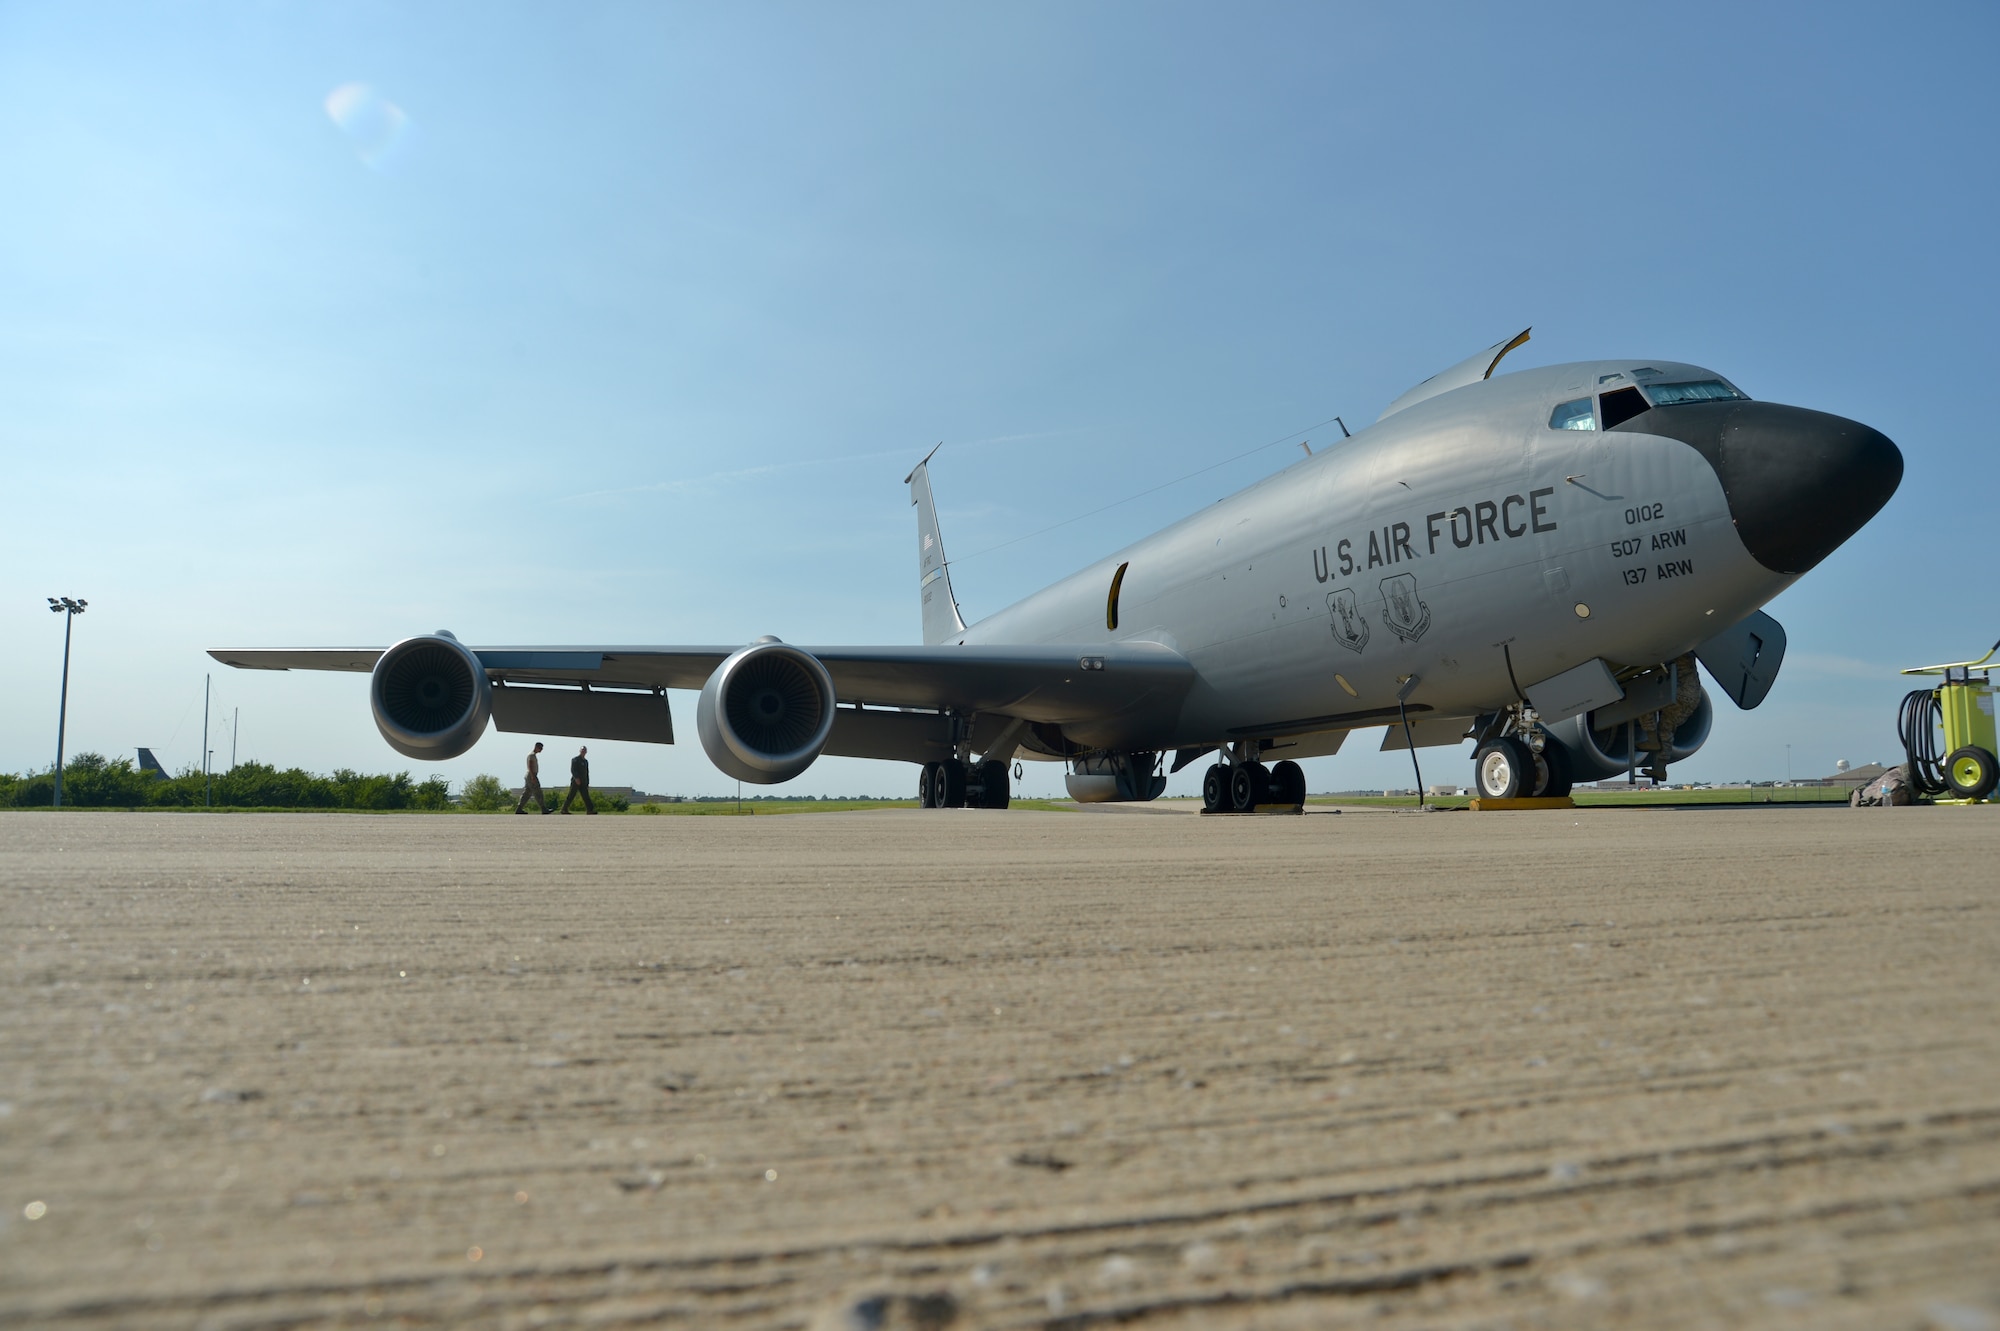 U.S. Air Force Lt. Col. Mark Hole, tanker detachment commander, assigned to the 185th Air Refueling Squadron, performs a walk around inspection of the aircraft before flying the last training mission of the 185 ARS on Tinker Air Force base, June 30, 2015, at Tinker Air Force base, Okla. The 185 ARS will be transitioning to Air Force Special Operations Command. (U.S. Air National Guard photo by Tech Sgt. Caroline Essex/Released)